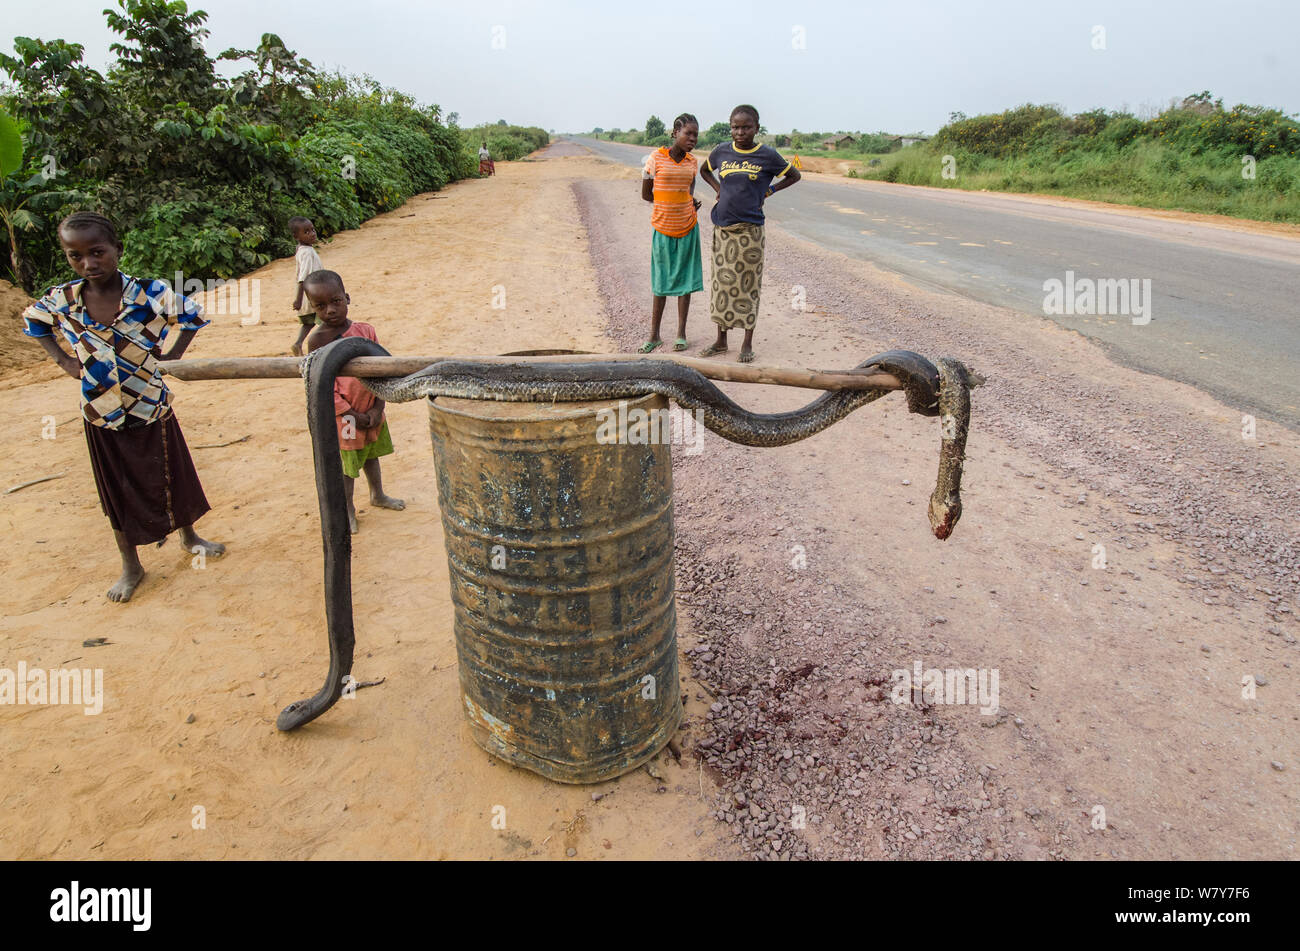 Local people with African rock python (Python sebae) at roadside, killed for bushmeat. Road from Brazzaville to Mbomo, Republic of Congo (Congo-Brazzaville), Africa, June 2013. Stock Photo